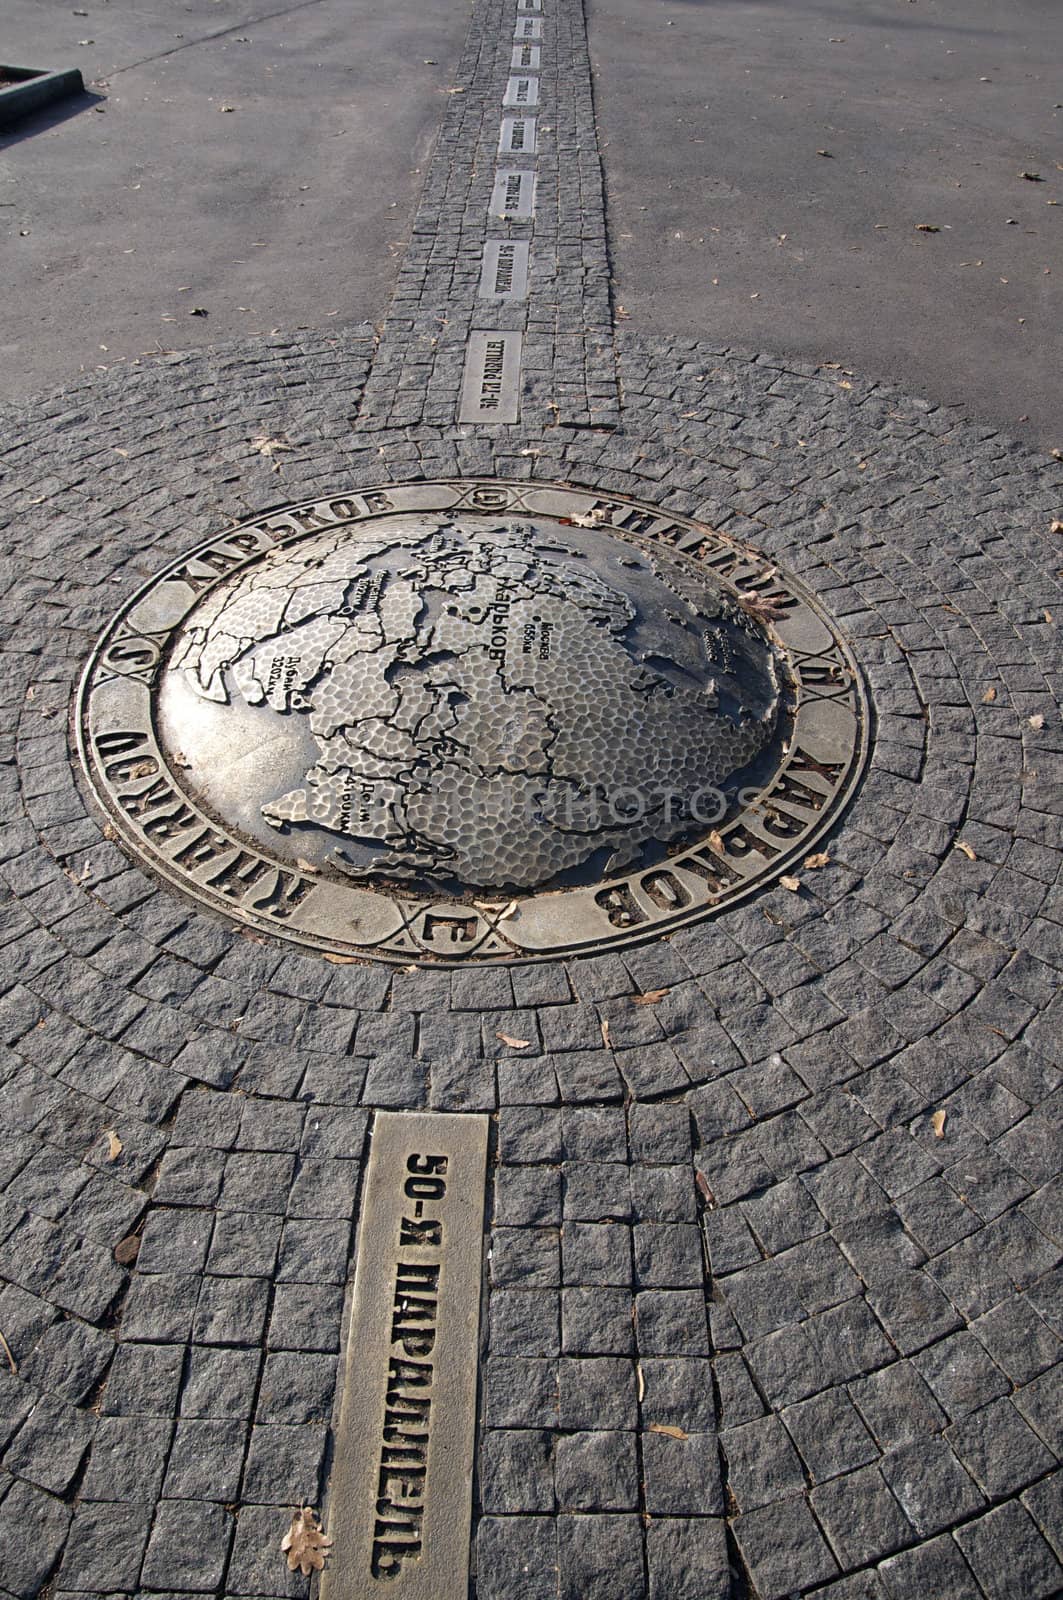 38th parallel in the city of Kharkov on the pavement marking